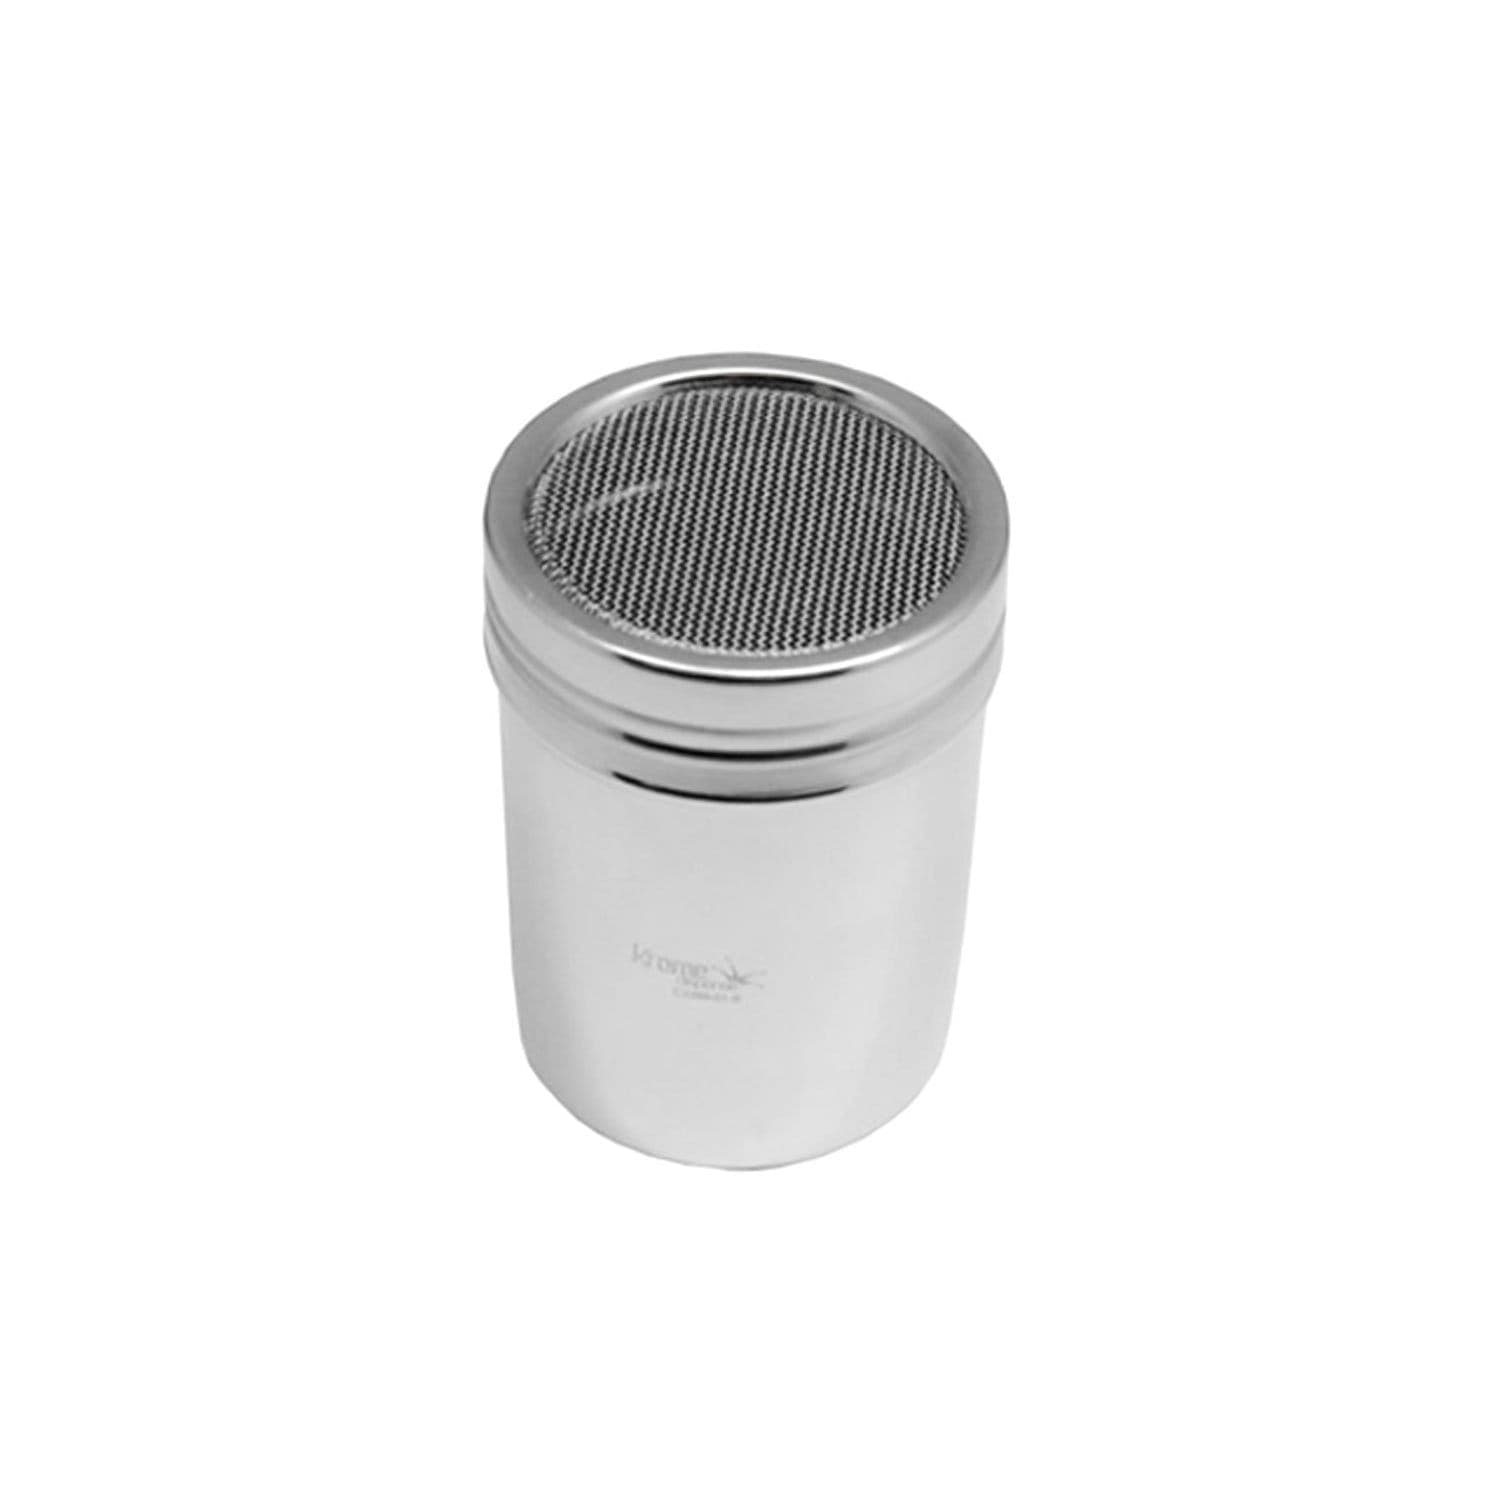 KROME COFFEE COCOA SHAKER FINE STAINLESS STEEL - C2289